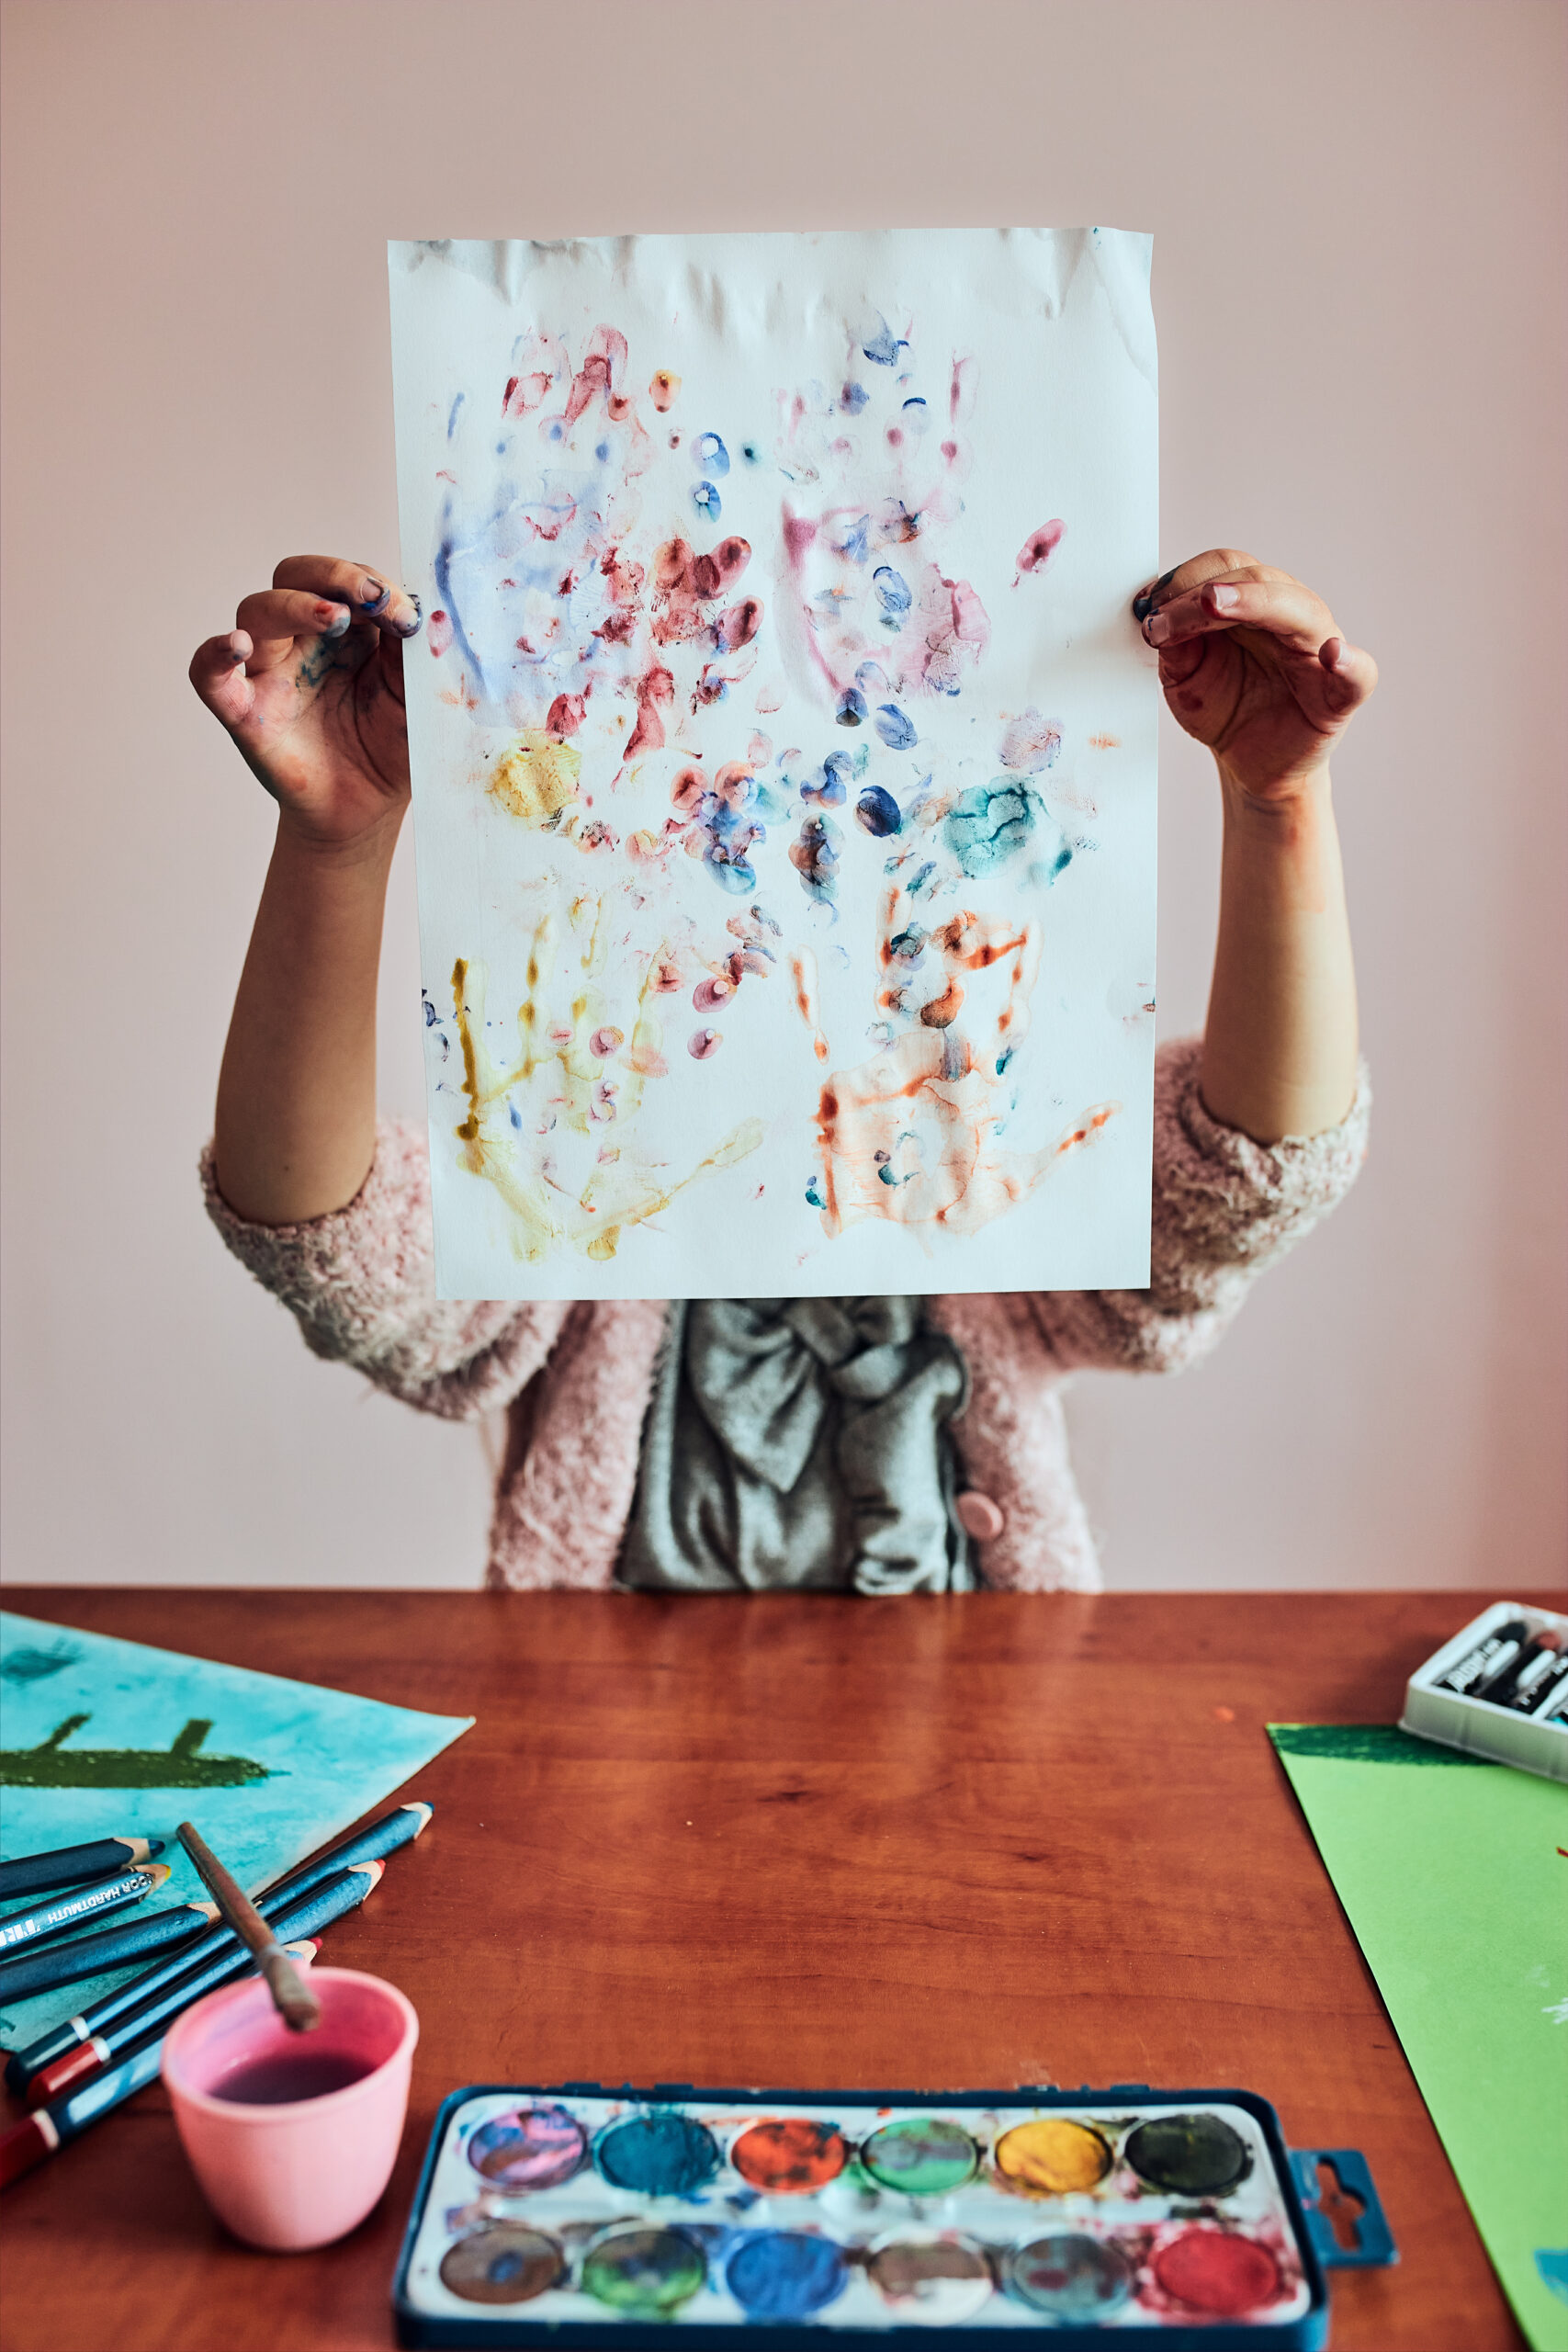 Introducing Art Materials to Young Children: 101